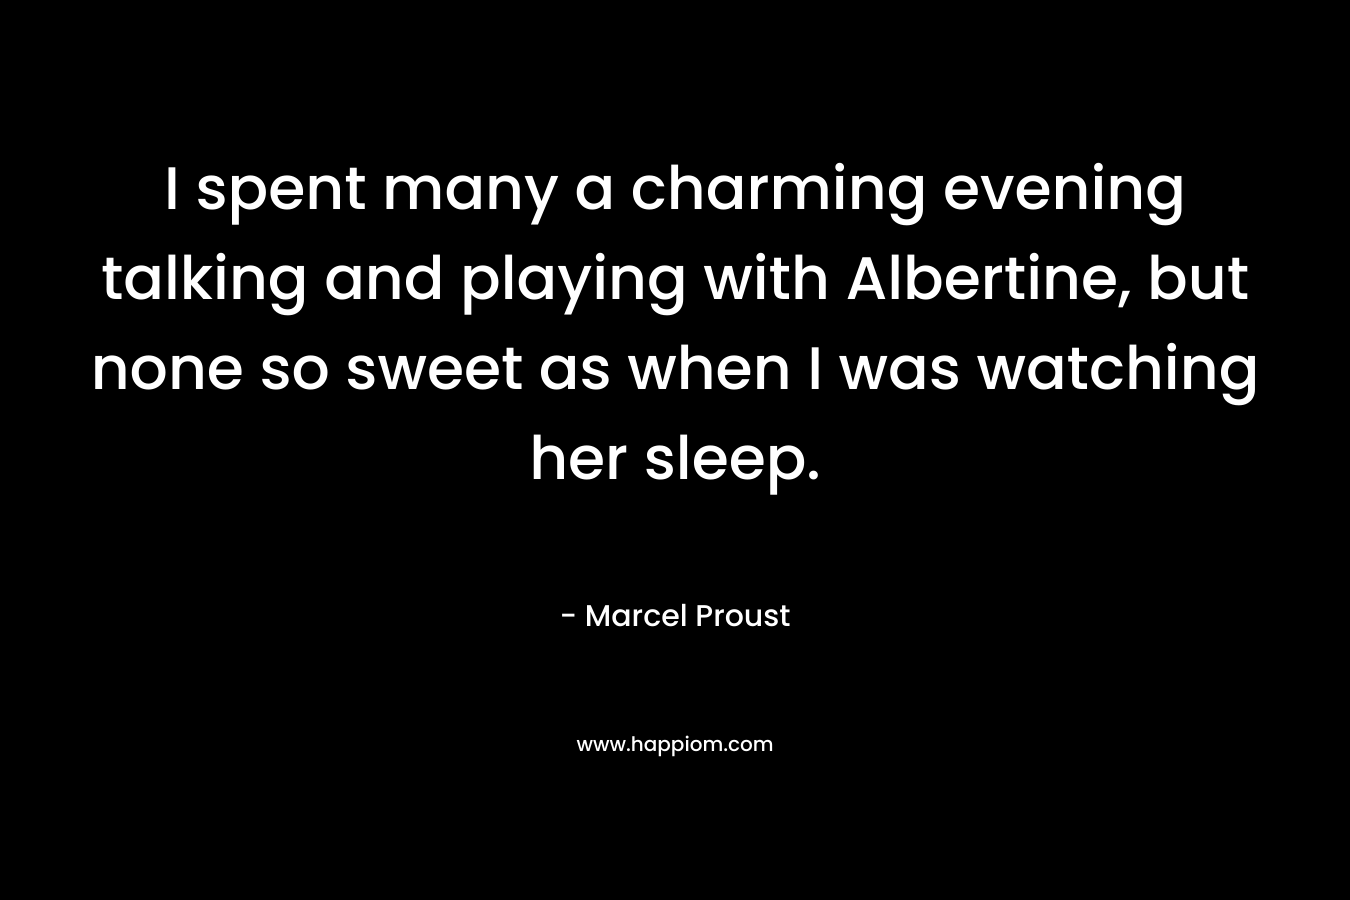 I spent many a charming evening talking and playing with Albertine, but none so sweet as when I was watching her sleep. – Marcel Proust